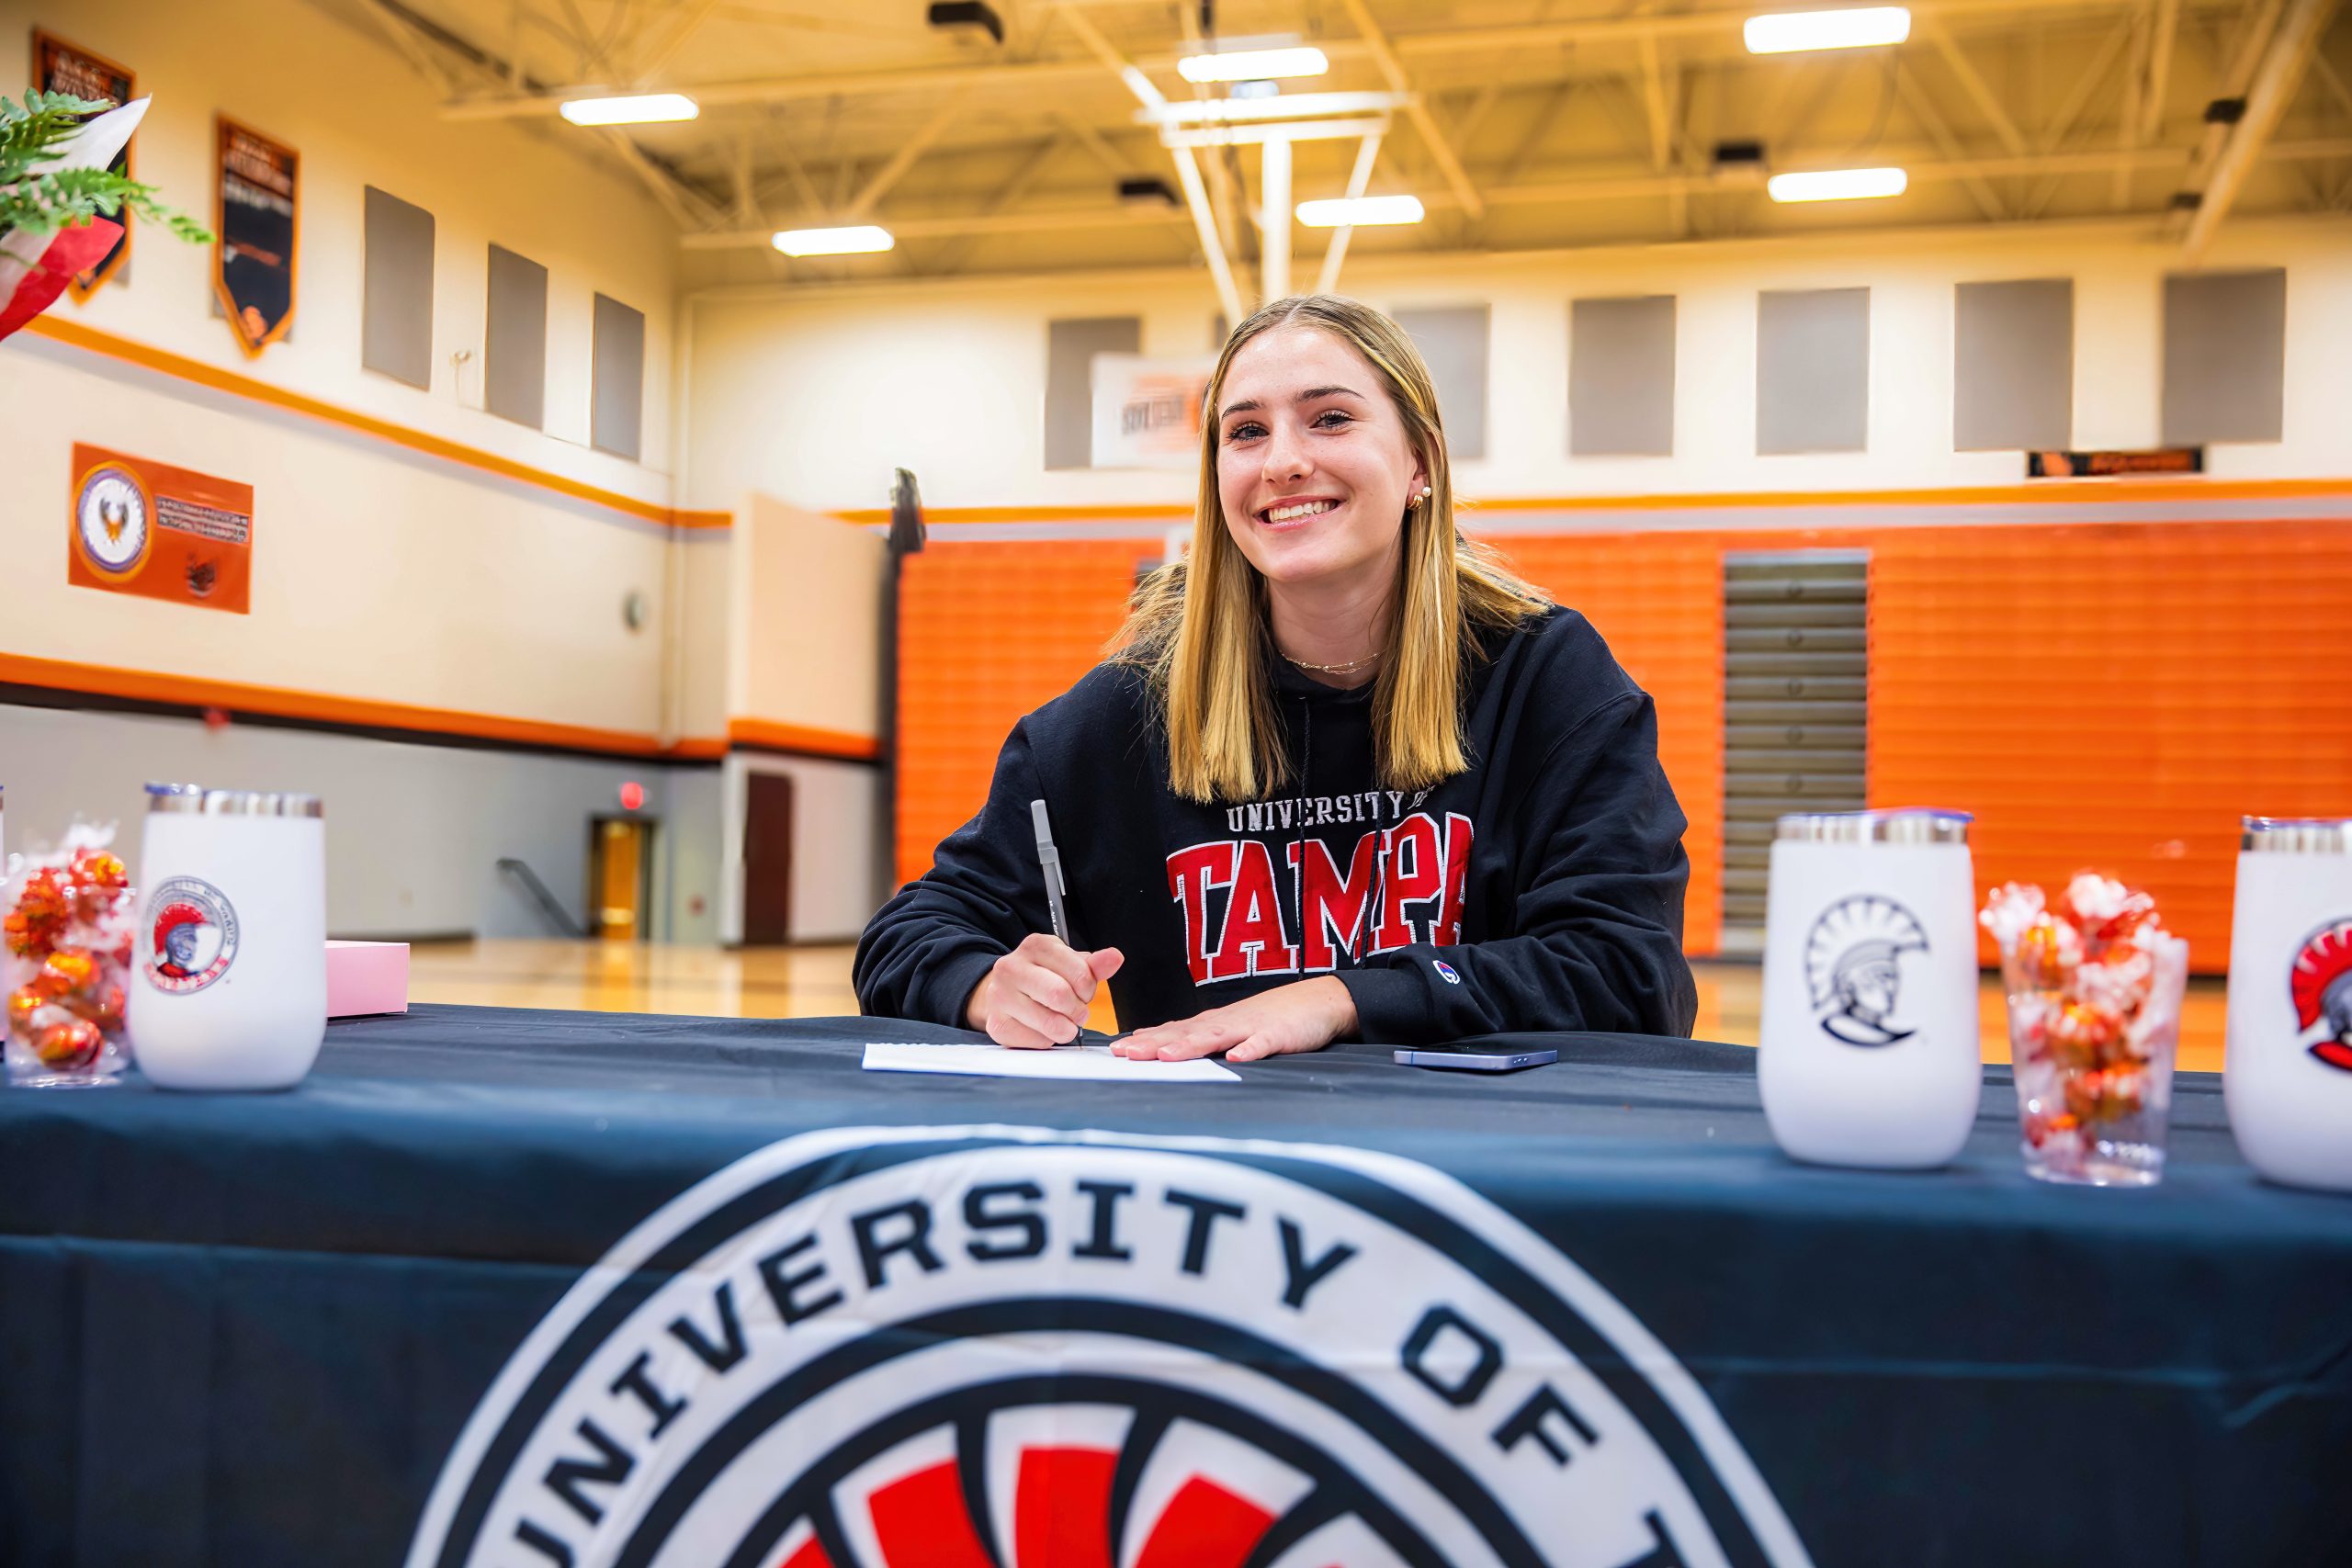 Audra Lyon signs her official commitment to play lacrosse at The University of Tampa.